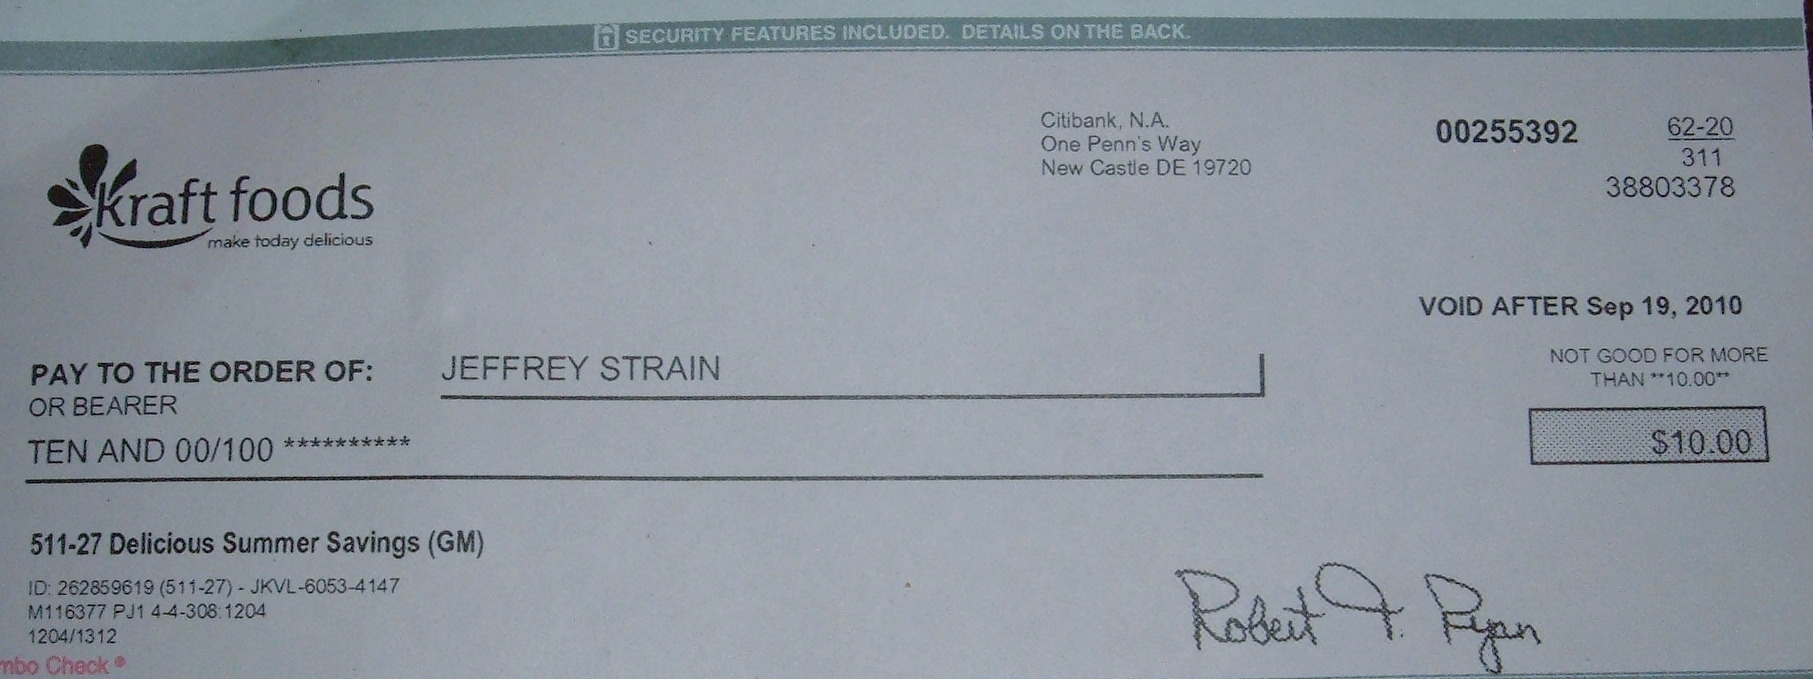 new-york-property-owners-getting-rebate-checks-months-early